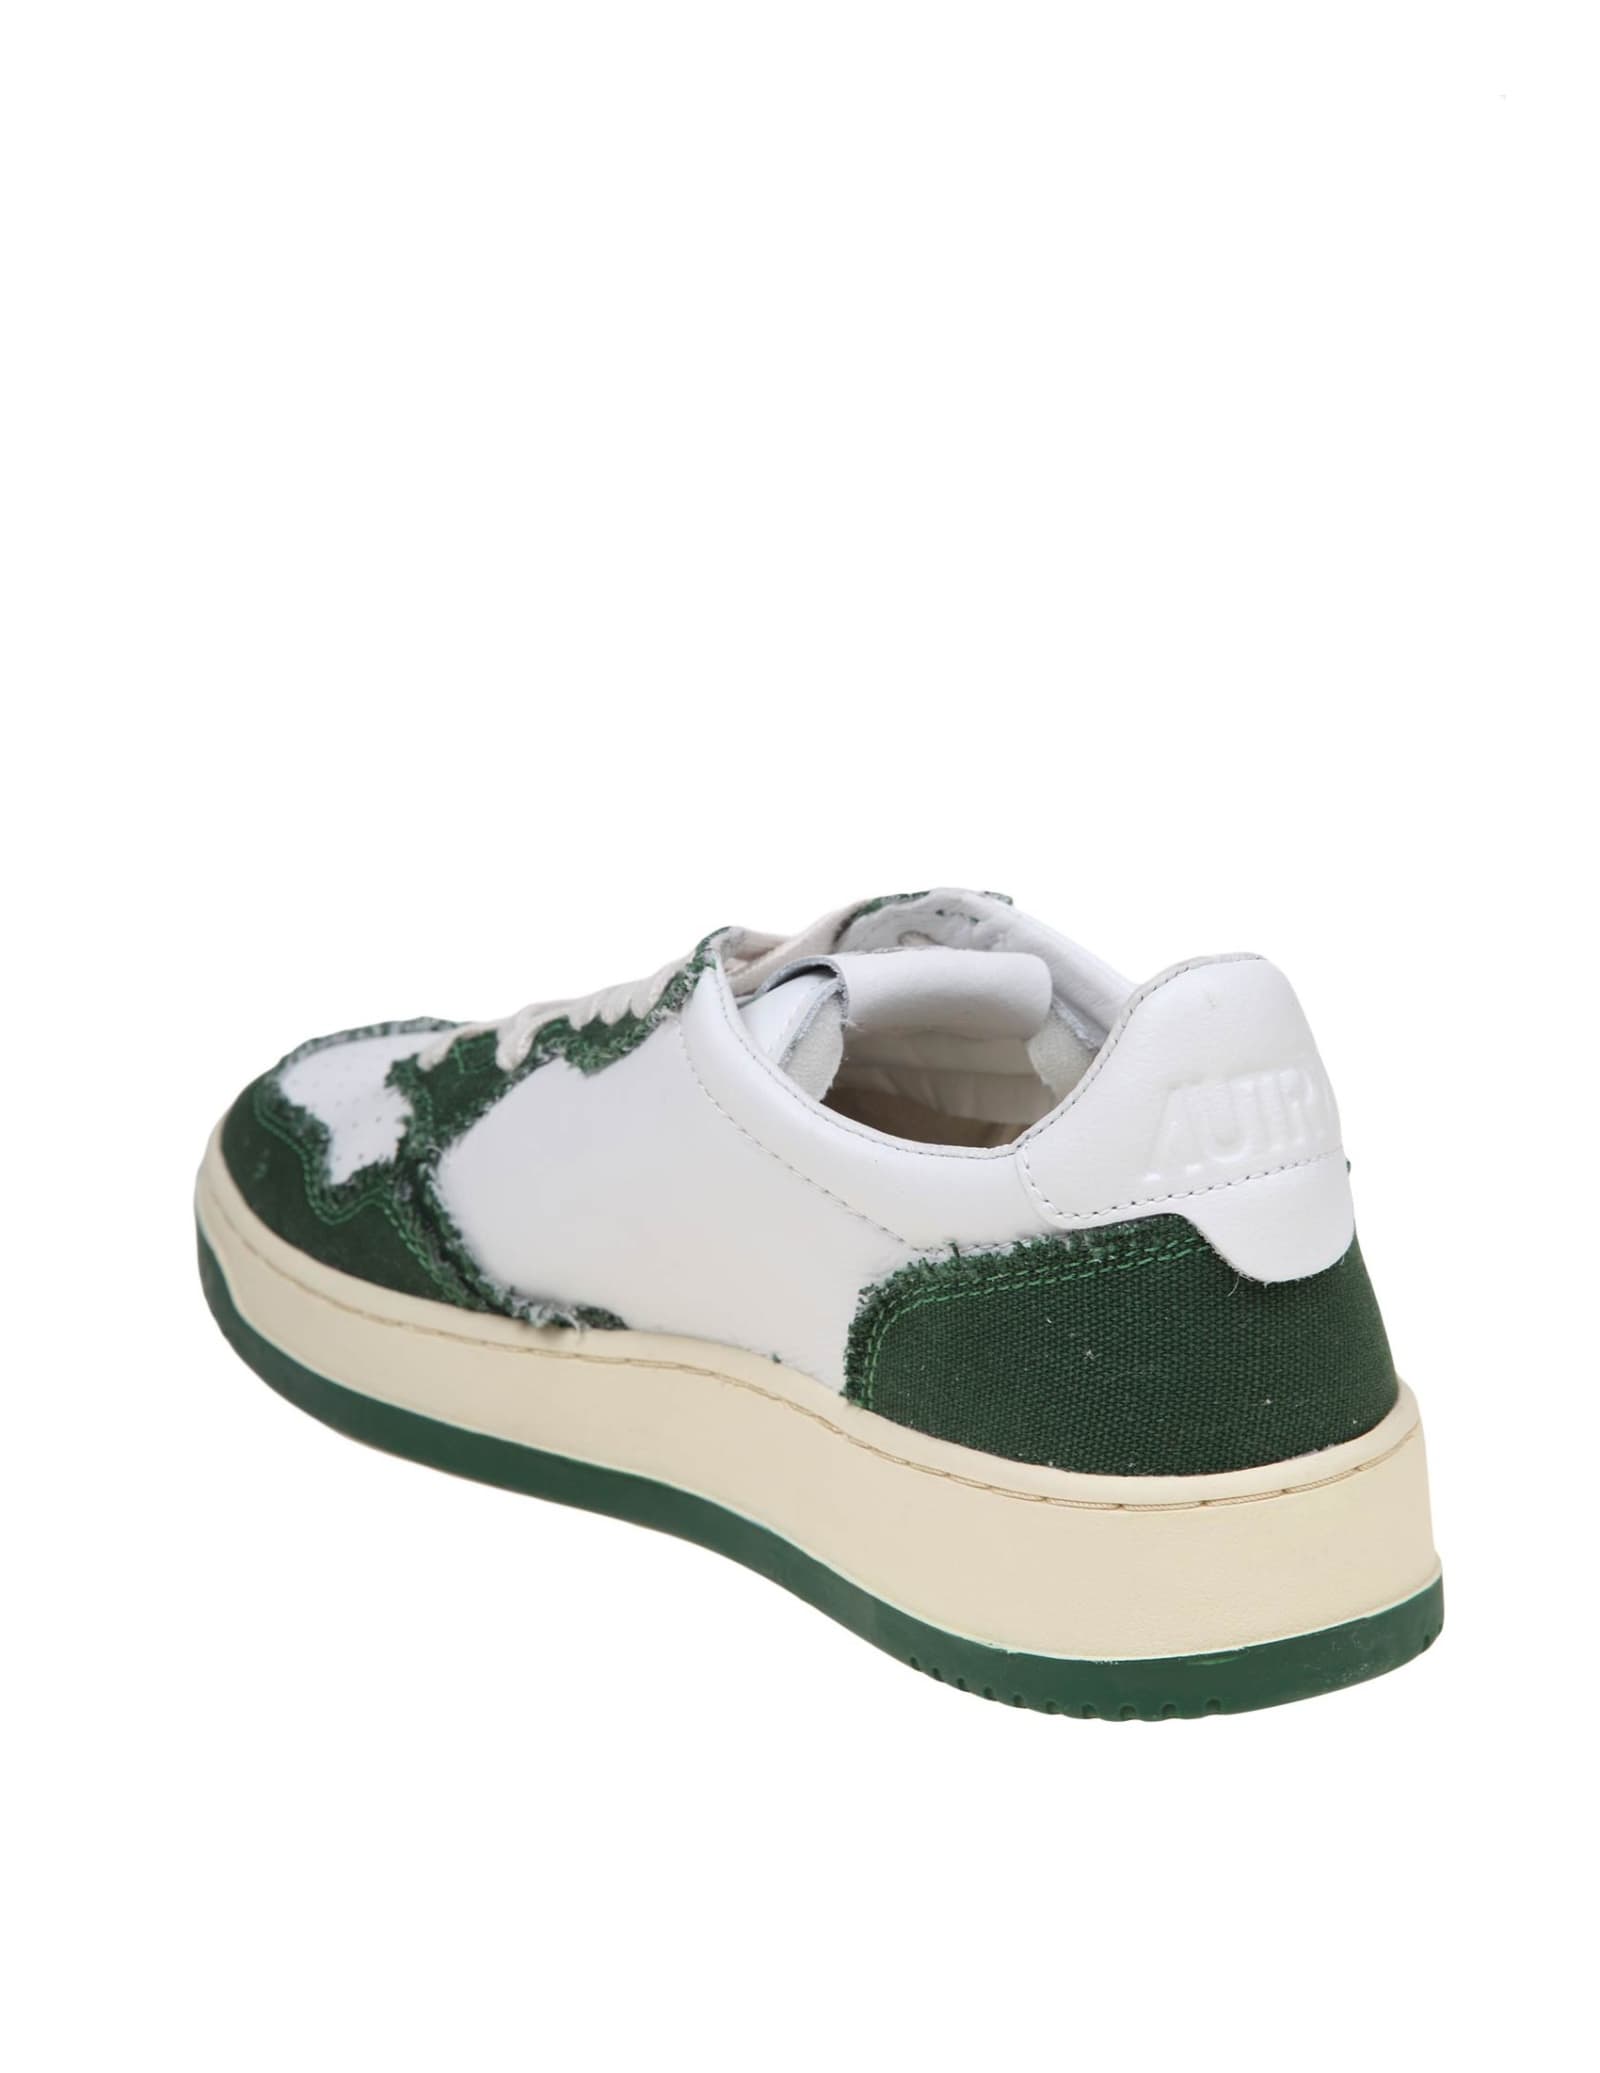 Shop Autry Sneakers In White And Green Leather And Canvas In Canvas/bi Eden